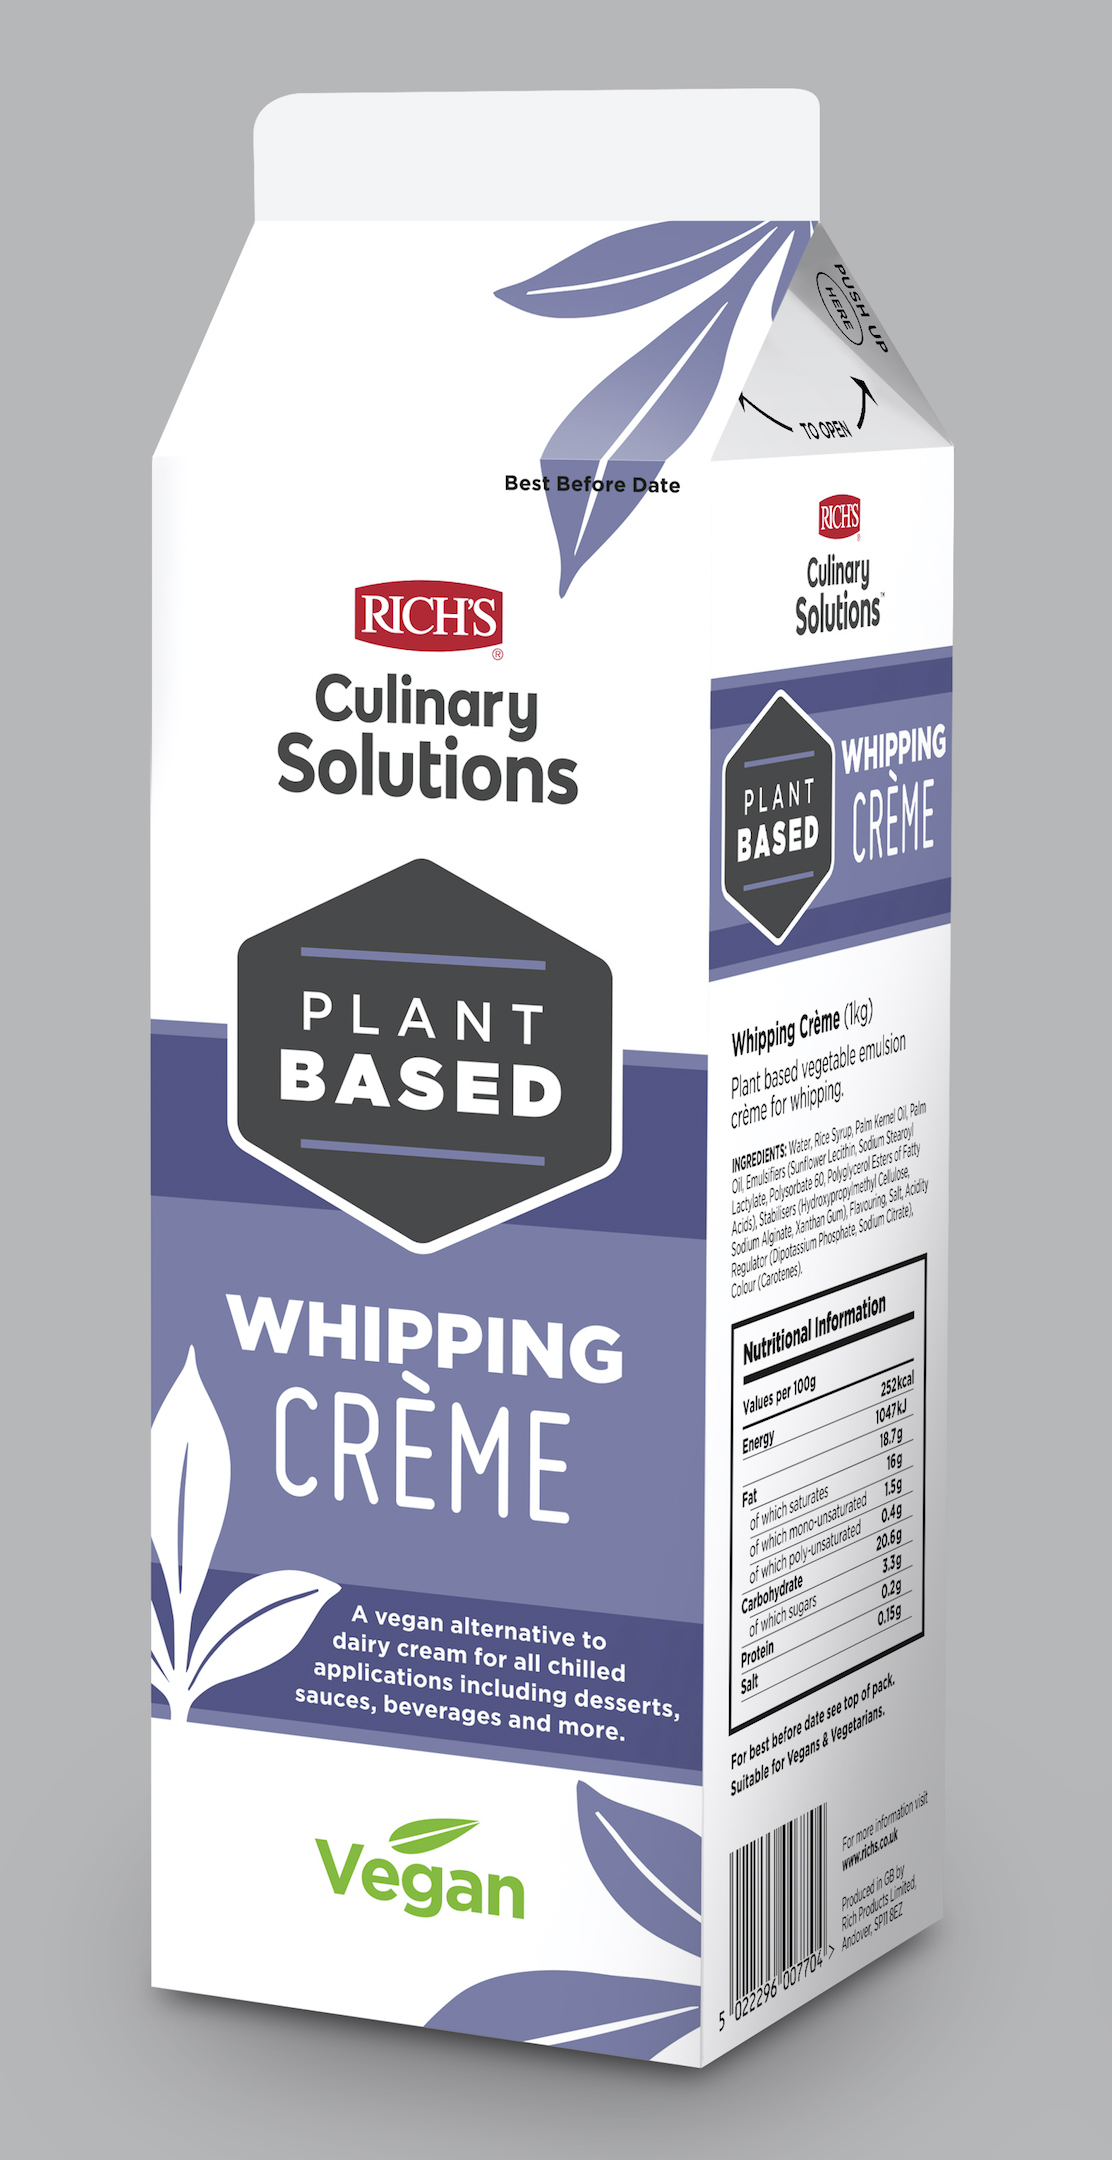 Rich’s Plant Based Whipping Creme